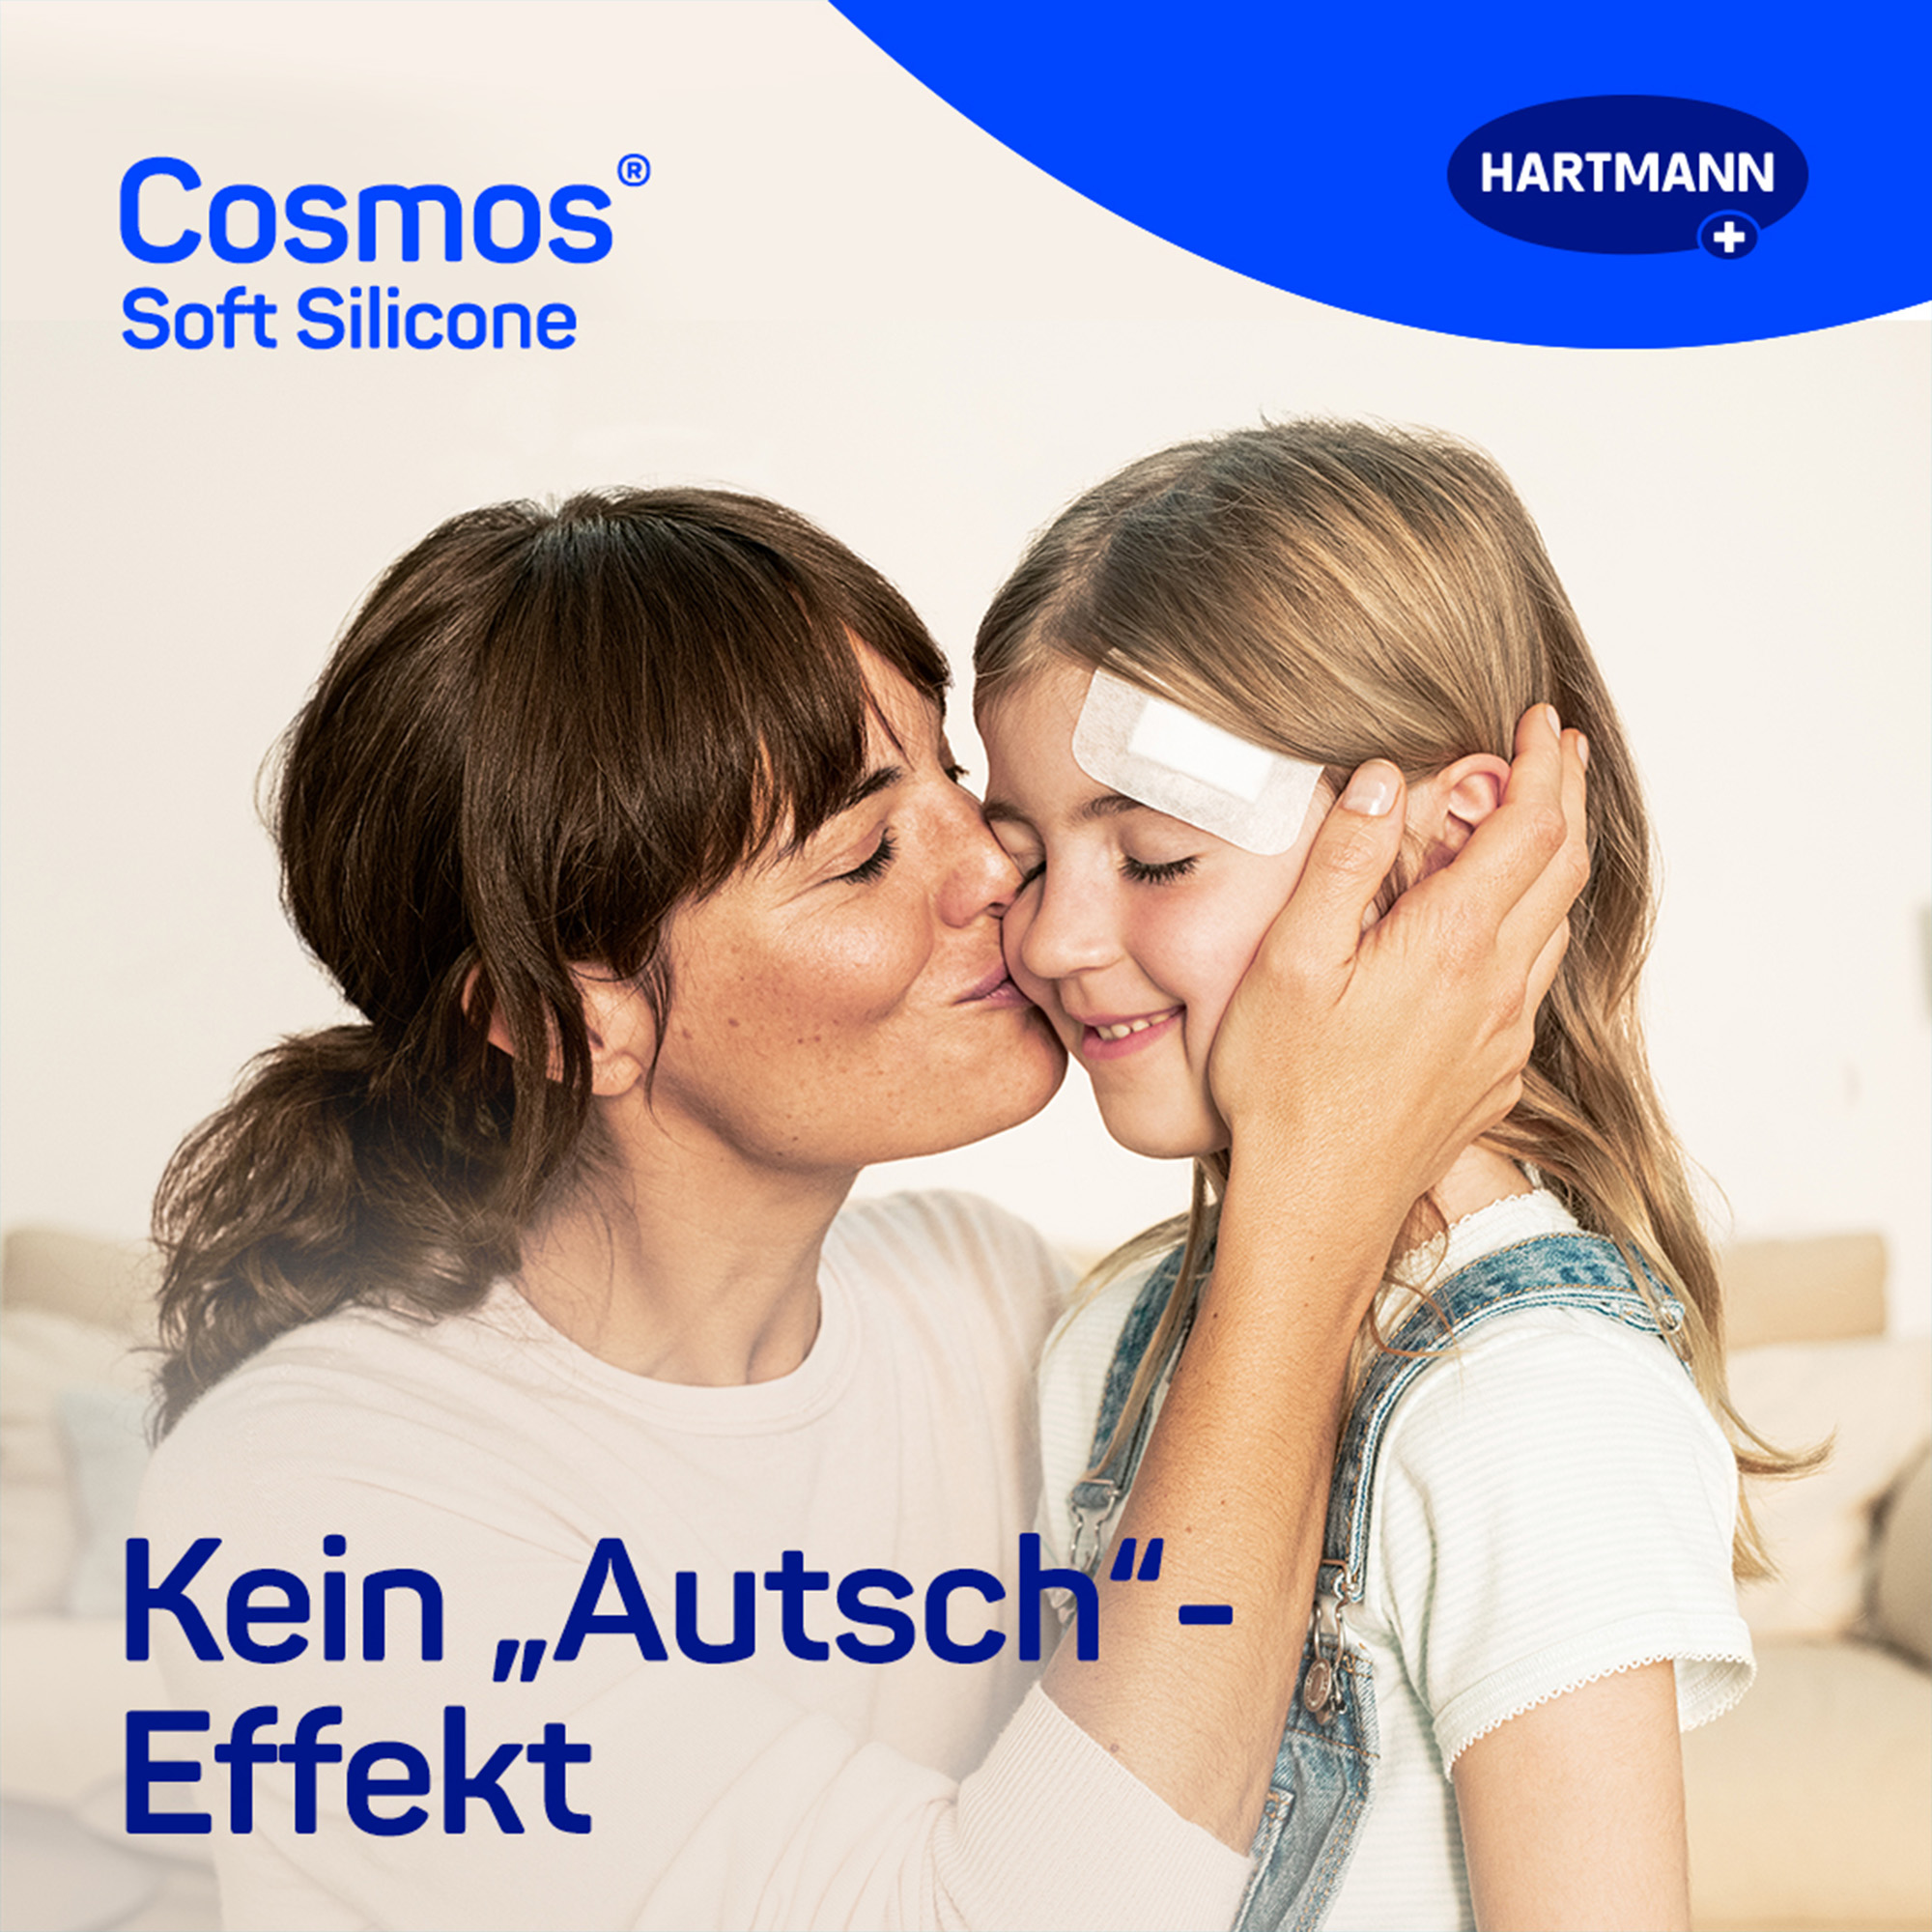 Hartmann Cosmos® soft silicone plaster strips in 2 different sizes, in a folding box